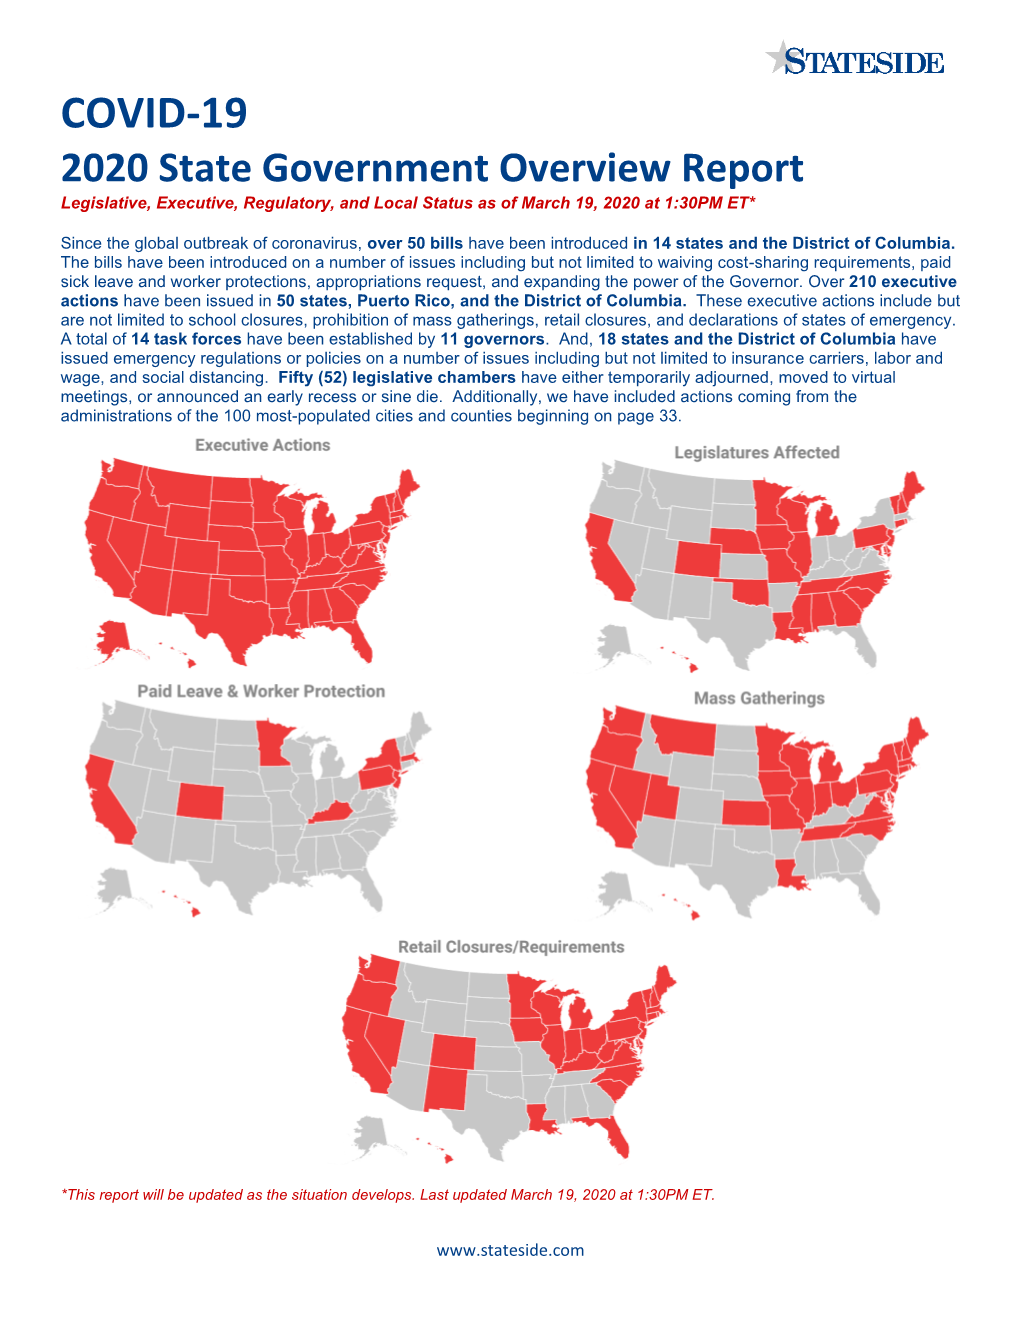 COVID-19 2020 State Government Overview Report Legislative, Executive, Regulatory, and Local Status As of March 19, 2020 at 1:30PM ET*